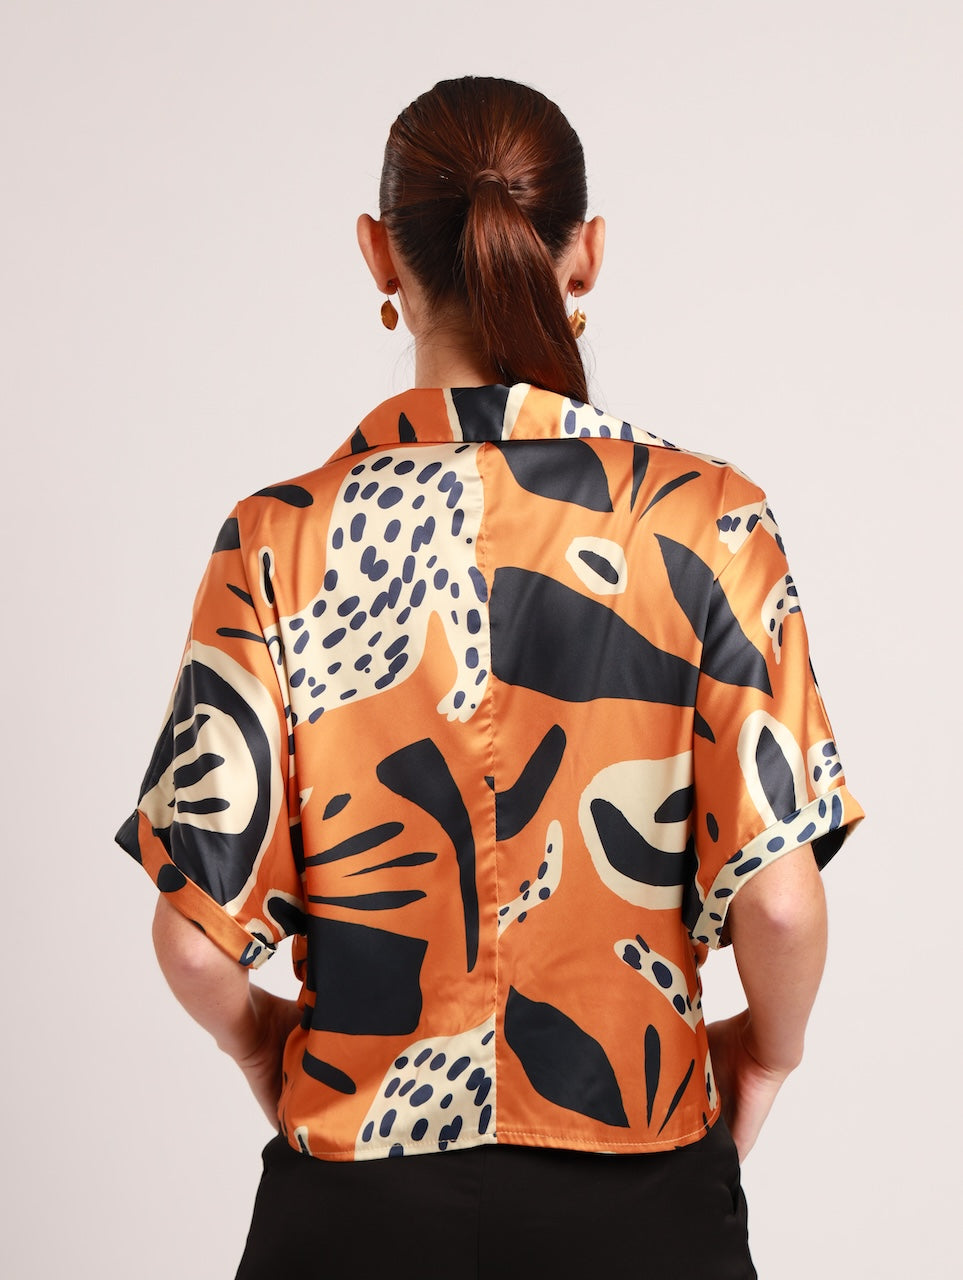 CROPPED BATWING TOP / WILD CAT